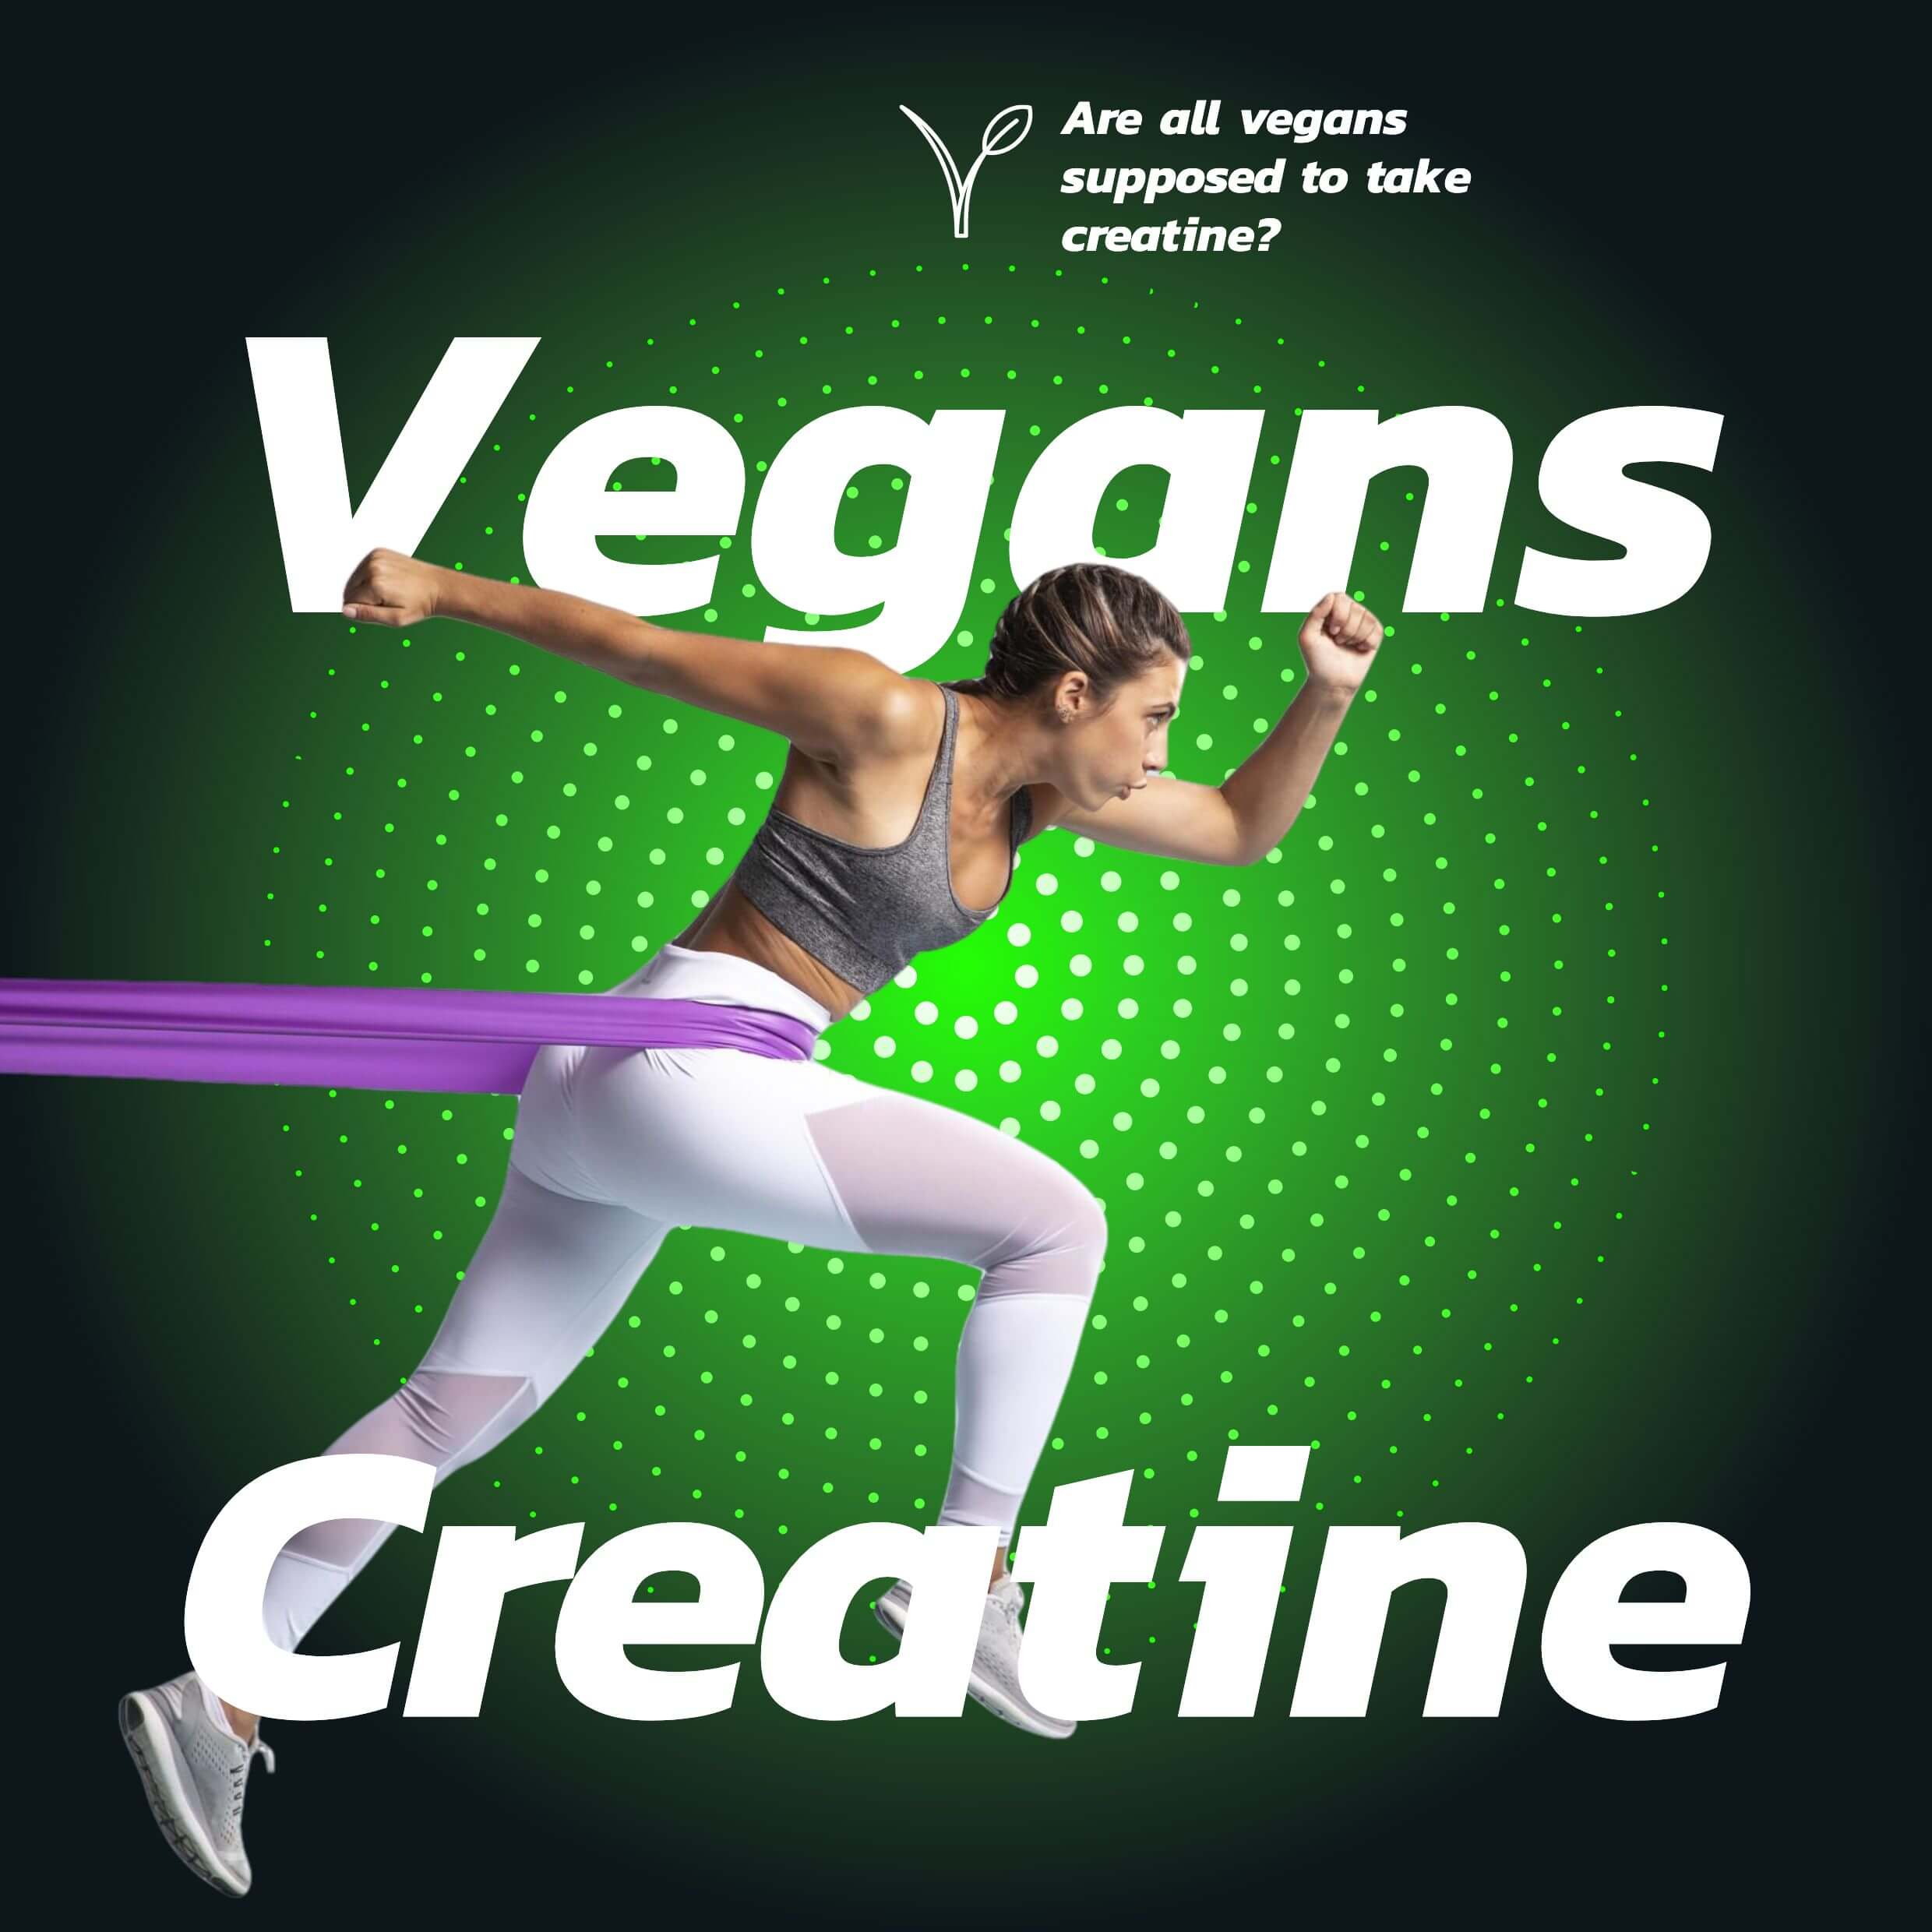 Creatine is a naturally occurring compound found in many foods. A small amount of creatine is found in pulses, vegetables, fruits, dairy products and red meat. When taken as a nutritional supplement, it provides energy to help you train harder, build muscle mass and improve your strength. Creatine comes in various forms, such as powder capsules or bulk tablets that are mixed with water or other beverages. In this article I have published complete information about vegan creatine sources : Foods High Creatine for Vegetarians and Vegans Creatine is a pretty common supplement. You might see it advertised on TV or in magazines, and you might see people taking it at social events, too. While many people take creatine for the explicit purpose of gaining muscle mass and strength, many others do so unknowingly. Creatine is a naturally-occurring substance in most foods and can be produced in the body from other amino acids. A relatively small amount of creatine is necessary to provide the body with enough energy to carry out basic bodily functions while training. Thus, most people who take creatine supplements do so because they believe it will help them meet their fitness goals and reach their goals more easily. However, before you take your first scoop of creatine powder or your first serving of vegan foods containing creatine, you should know whether  it’s right for you — particularly if you’re a vegan and concerned about keeping animal products out of your diet. Taking a creatine supplement becomes necessary if you are looking for higher-dose benefits rather than just getting what nature has already provided to you as part of your diet. Should Vegans Take Creatine? There are certainly many benefits of taking creatine, including improved strength, muscle endurance, and muscle growth. Additionally, you can maintain a healthy muscular weight and size by taking creatine, as well as help prevent the loss of muscle that comes with age. Lastly, creatine is a popular supplement among bodybuilders, and many people take it for gaining muscle mass or strength. That being said, you should keep in mind a few things before taking creatine. First, you should keep in mind that creatine is derived from protein. it’s important to note that consuming too much protein at one time can result in muscle breakdown . Creatine is a supplement that can be used by people at any level, and many vegans don’t take it to increase performance or strength. Rather, they take it because they believe it will provide them with a better quality of life, including increased energy and improved mental focus. Thus, while these benefits are certainly possible when you take creatine, you should keep in mind that many people take it for non-athletic benefits, too. Is It Safe for Vegans to Take Creatine? There are several concerns about whether vegan-friendly creatine is safe for vegans to take. First, creatine is derived from protein. Because vegans are advised to consume a small amount of protein daily, consuming an excessive amount of creatine could result in muscle growth — an unwanted side effect. Additionally, creatine is a banned substance in many sports, including bodybuilding and weightlifting. This is because it has been shown to increase the risk of heart problems. How to Take Creatine While creatine is naturally found in many foods, such as meat, fish, and fish-based products, such as salmon and tuna, it is also commonly sold as a supplement. Thus, many people who take creatine supplements also take it in supplement form. There is also a variety of creatine supplements to choose from. The most common forms of creatine sold include powder, capsules, and liquid. You can buy creatine powders in supermarkets and health food stores, capsules at pharmacies, and creatine liquid at supplement stores. You can also buy it online, but be careful because many creatine products are labelled as dietary supplements, not food supplements. When buying creatine, make sure it has been derived from food sources, not synthesized in a lab. Furthermore, make sure the label lists the amount of creatine per serving, along with the number of calories and protein per serving. Some brands of creatine also have other ingredients, such as sugar or maltodextrin, which are not necessary and are in some cases harmful. You should also be careful about whether you buy a vegan-friendly creatine supplement. Maybe this article about vegan athletes is interesting to you: : Professional athletes that are vegan Exogenous Creatine vs. creatine supplements Many people want to know whether vegan-friendly creatine is safe or whether it works as well, which makes sense. You can take creatine as a supplement, which is generally safe and is found in many foods, or you can take it in supplement form, which is generally safe and is derived from a lab. The thing about creatine is that it is a molecule that is naturally produced in the body. Thus, taking it by mouth as a supplement is the same thing as taking it by mouth as part of your cells. However, one thing to keep in mind is that while taking it by mouth as a supplement is generally safe, it’s important to note that it is also artificial and that it is not produced by your body — which means you won’t get the same benefits as if you had naturally produced creatine in your body. Thus, it’s important to consider whether a vegan-friendly creatine supplement is worth it. Are all vegans supposed to take creatine? This is a question that's been on many people's minds lately, as studies have been showing that creatine could help increase muscle mass and improve performance in athletes who are vegan or vegetarian. So is it time for all vegans to start taking creatine? The short answer is: it depends. There's not enough research yet to say for certain whether or not all vegans should take creatine, but there are a few things to consider. First of all, it's important to understand that creatine isn't a magic Bullet. It won't solve all your muscle-building problems - you still need to eat a balanced diet and exercise regularly to get results. Secondly, there are some potential side effects associated with taking creatine. So before you start taking it, make sure to talk to your doctor about the risks and benefits. In the end, it's up to each individual vegan to decide whether or not they want to take creatine - but it's certainly something worth considering. What are vegan sources of creatine? There are many vegan sources of creatine, including black beans, tofu, and spinach.Also, vegan creatine supplements can be made from plant-based sources such as soy, rice, wheat, and pea protein. Be sure to read this very important article :  Complete nutrition guide for vegan athletes Are vegans low in creatine? There is no definitive answer, as creatine can be found in both vegetarian and meat-based diets. Some vegan athletes may choose to take a creatine supplement to ensure adequate levels of the compound. Is it Better To Take Creatine Being Natural? The Answer Might Surprise You! Many experts believe that taking creatine in a natural form (such as from food) is more effective than taking supplements that contain artificial ingredients. the benefits of taking creatine either as a natural or synthetic product can vary depending on the individual. Some people believe that taking creatine as a natural product can offer a more favourable mix of nutrients and hormones, which can result in better performance. However, other people believe that synthetic creatine is just as effective as natural creatine and offers a number of other benefits, including increased strength and stamina. It is important to consult with a healthcare professional to determine which is best for you. 5 Best protein powder vegan for people Answering the Myths: Is it Harder for Vegan Athletes to Build Muscle? The muscle building process for vegan athletes will vary depending on the individual's diet and exercise regimen. However, some general tips that may help vegan athletes build muscle include eating a high-quality protein supplement, working out consistently, and avoiding muscle-damaging supplements and foods. How to go vegan without losing muscle? - Tips and advice to help your change lifestyle There's no need to worry about losing muscle when transitioning to a vegan diet - in fact, many vegans find that they gain muscle mass while eating a plant-based diet. Here are a few tips to help you Going to vegan lifestyle smoothly: - Make sure to include plenty of plant-based protein sources in your diet. This can be found in grains, legumes, nuts, seeds, and tofu. - Make sure to consume adequate amounts of fiber. Fiber helps to keep you feeling full and satisfied, which can help you avoid overeating. - Make sure to drink plenty of water. Water helps to hydrate your body and flush out toxins. - Make sure to get plenty of sunlight exposure. Sunlight helps to promote the growth of healthy skin and hair. Other Factors to Consider When Taking Creatine While creatine is considered safe and is generally considered effective, many people don’t take it long enough for it to have any effect. Thus, it’s important to talk to your doctor before taking a creatine supplement. When taking creatine, it’s also important to keep in mind that many people don’t take it with an appropriate amount of water. In fact, many people believe that taking creatine with water makes it less effective. However, this is not the case. Final Words Many people wonder whether vegan-friendly creatine products is safe to take and whether it works as well as the typical creatine supplement. Fortunately, there are plenty of vegan foods that are naturally rich in creatine. Thus, you don’t have to worry about consuming a potentially supplement and you can feel confident that Creatine-rich foods can help you reach your fitness goals and maintain a healthy lifestyle. Also, if you need, you can find many vegan-friendly supplements in the market that are not tested on animals and are also free of animal products, dairy products and eggs. I usually include foods rich in creatine in my diet to supply the creatine my body needs. Do you take creatine supplements? Please share your experiences with me in the comments